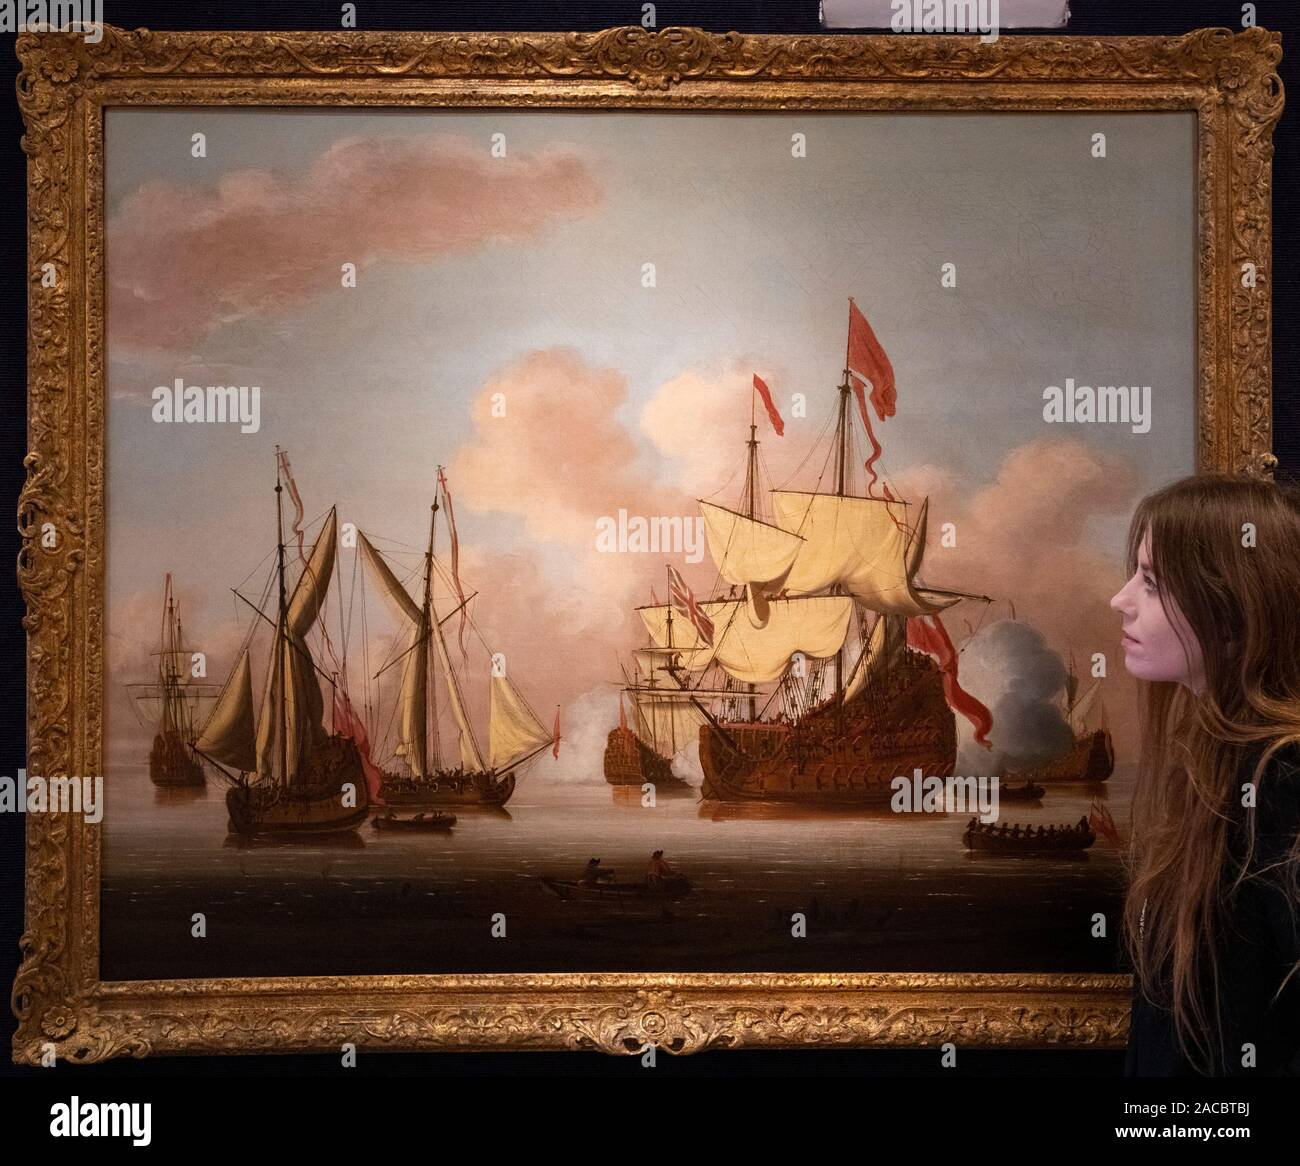 Bonhams, London, UK. 2nd December 2019. Old Masters Painting sale preview at Bonhams. Image: Cornelis van de Velde (Greenwich 1675-1729). A ship of the line of the Red Squadron firing a salute among various yachts. Estimate: £15,000-20,000. Credit: Malcolm Park/Alamy Live News. Stock Photo